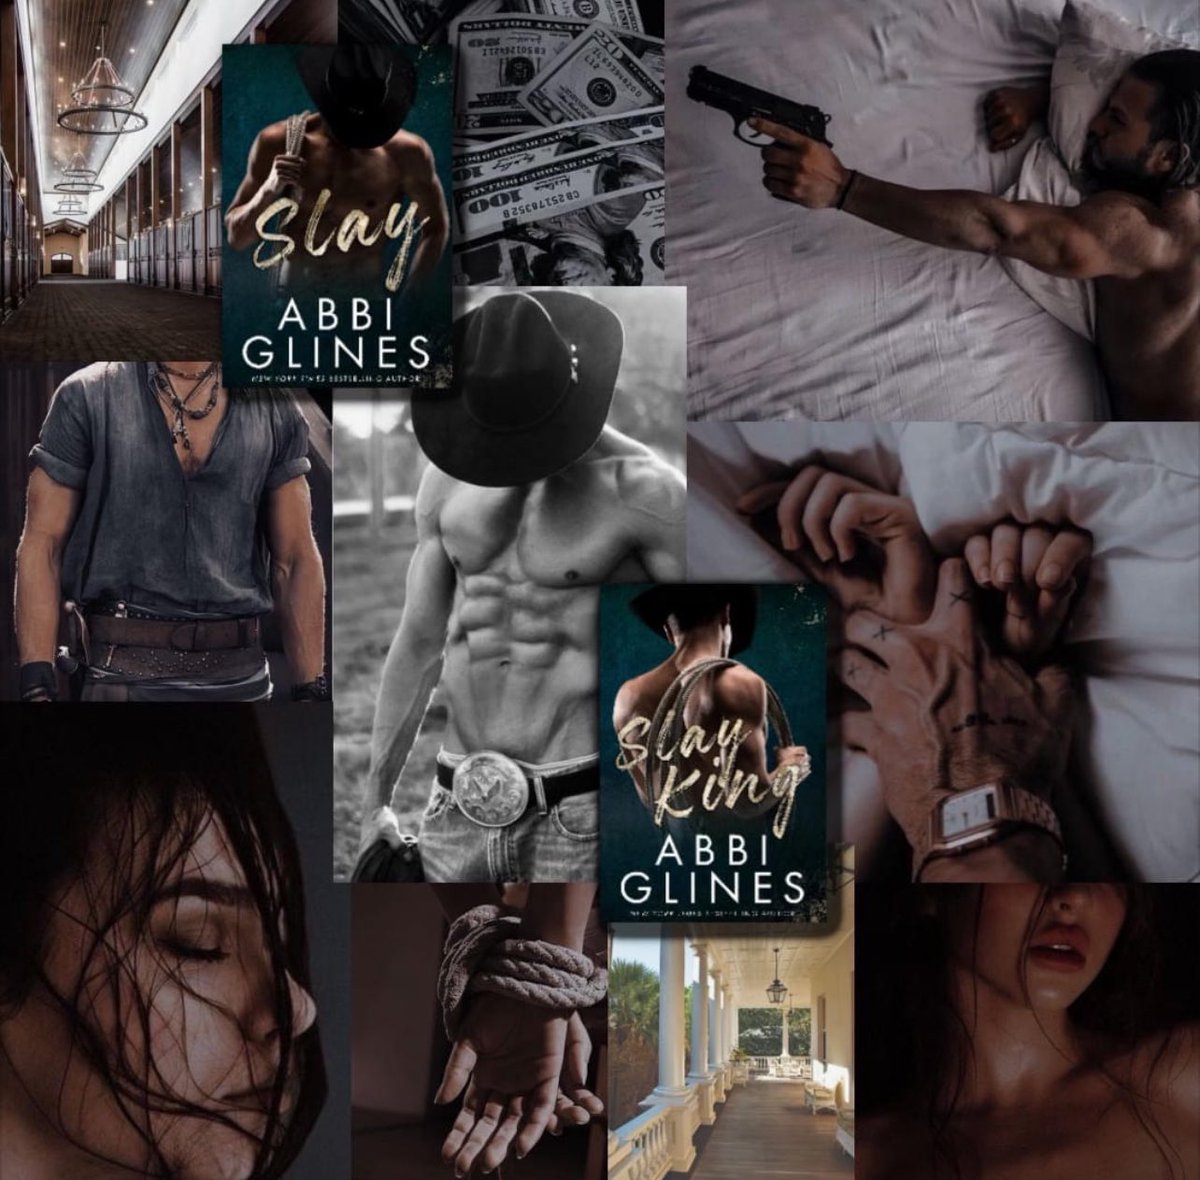 Alpha male, friends to lovers, touch her and die, Southern boy mafia, forced proximity, dirty talker, kinks, all the heat. 1-CLICK 𝐒𝐥𝐚𝐲 now! geni.us/AGSlay #KindleUnlimited 1-CLICK 𝐒𝐥𝐚𝐲 𝐊𝐢𝐧𝐠 now! geni.us/slayking